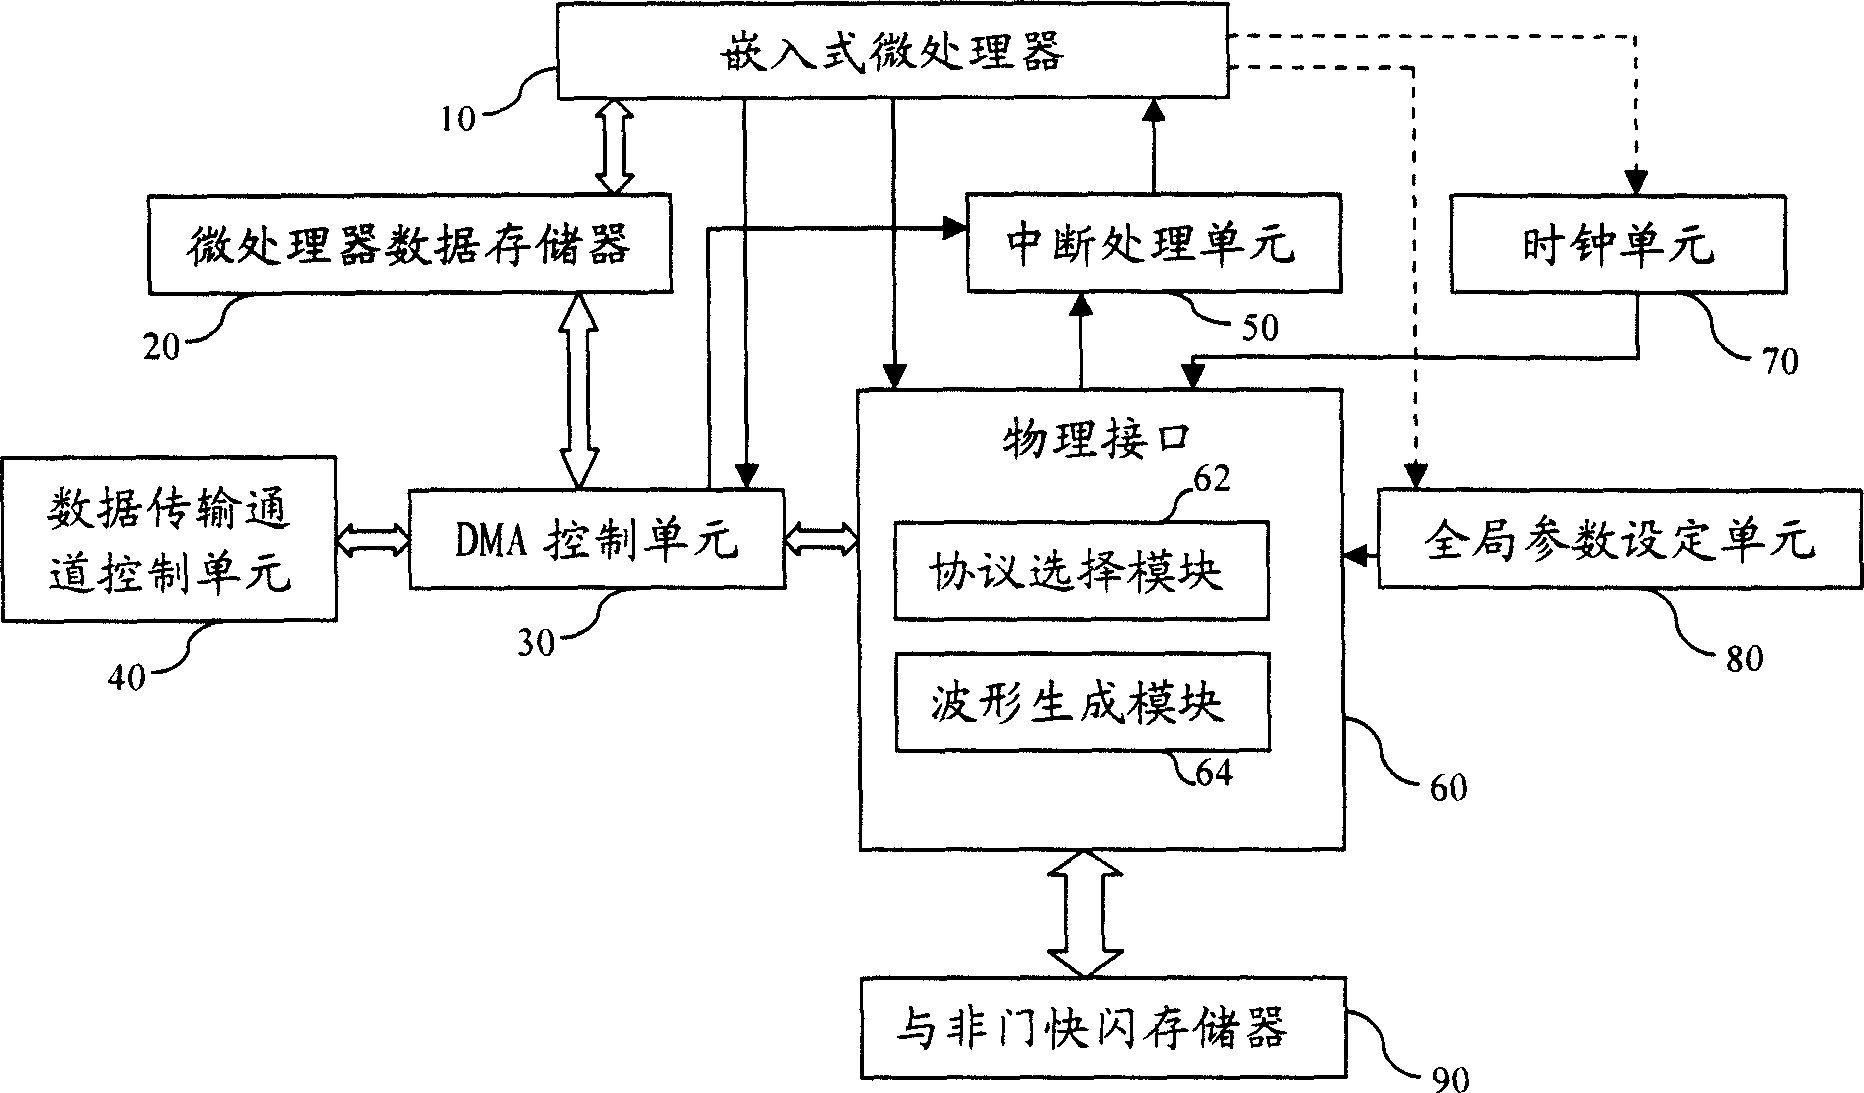 Physical interface of NAND gate quick flashing storage, interface method and management equipment